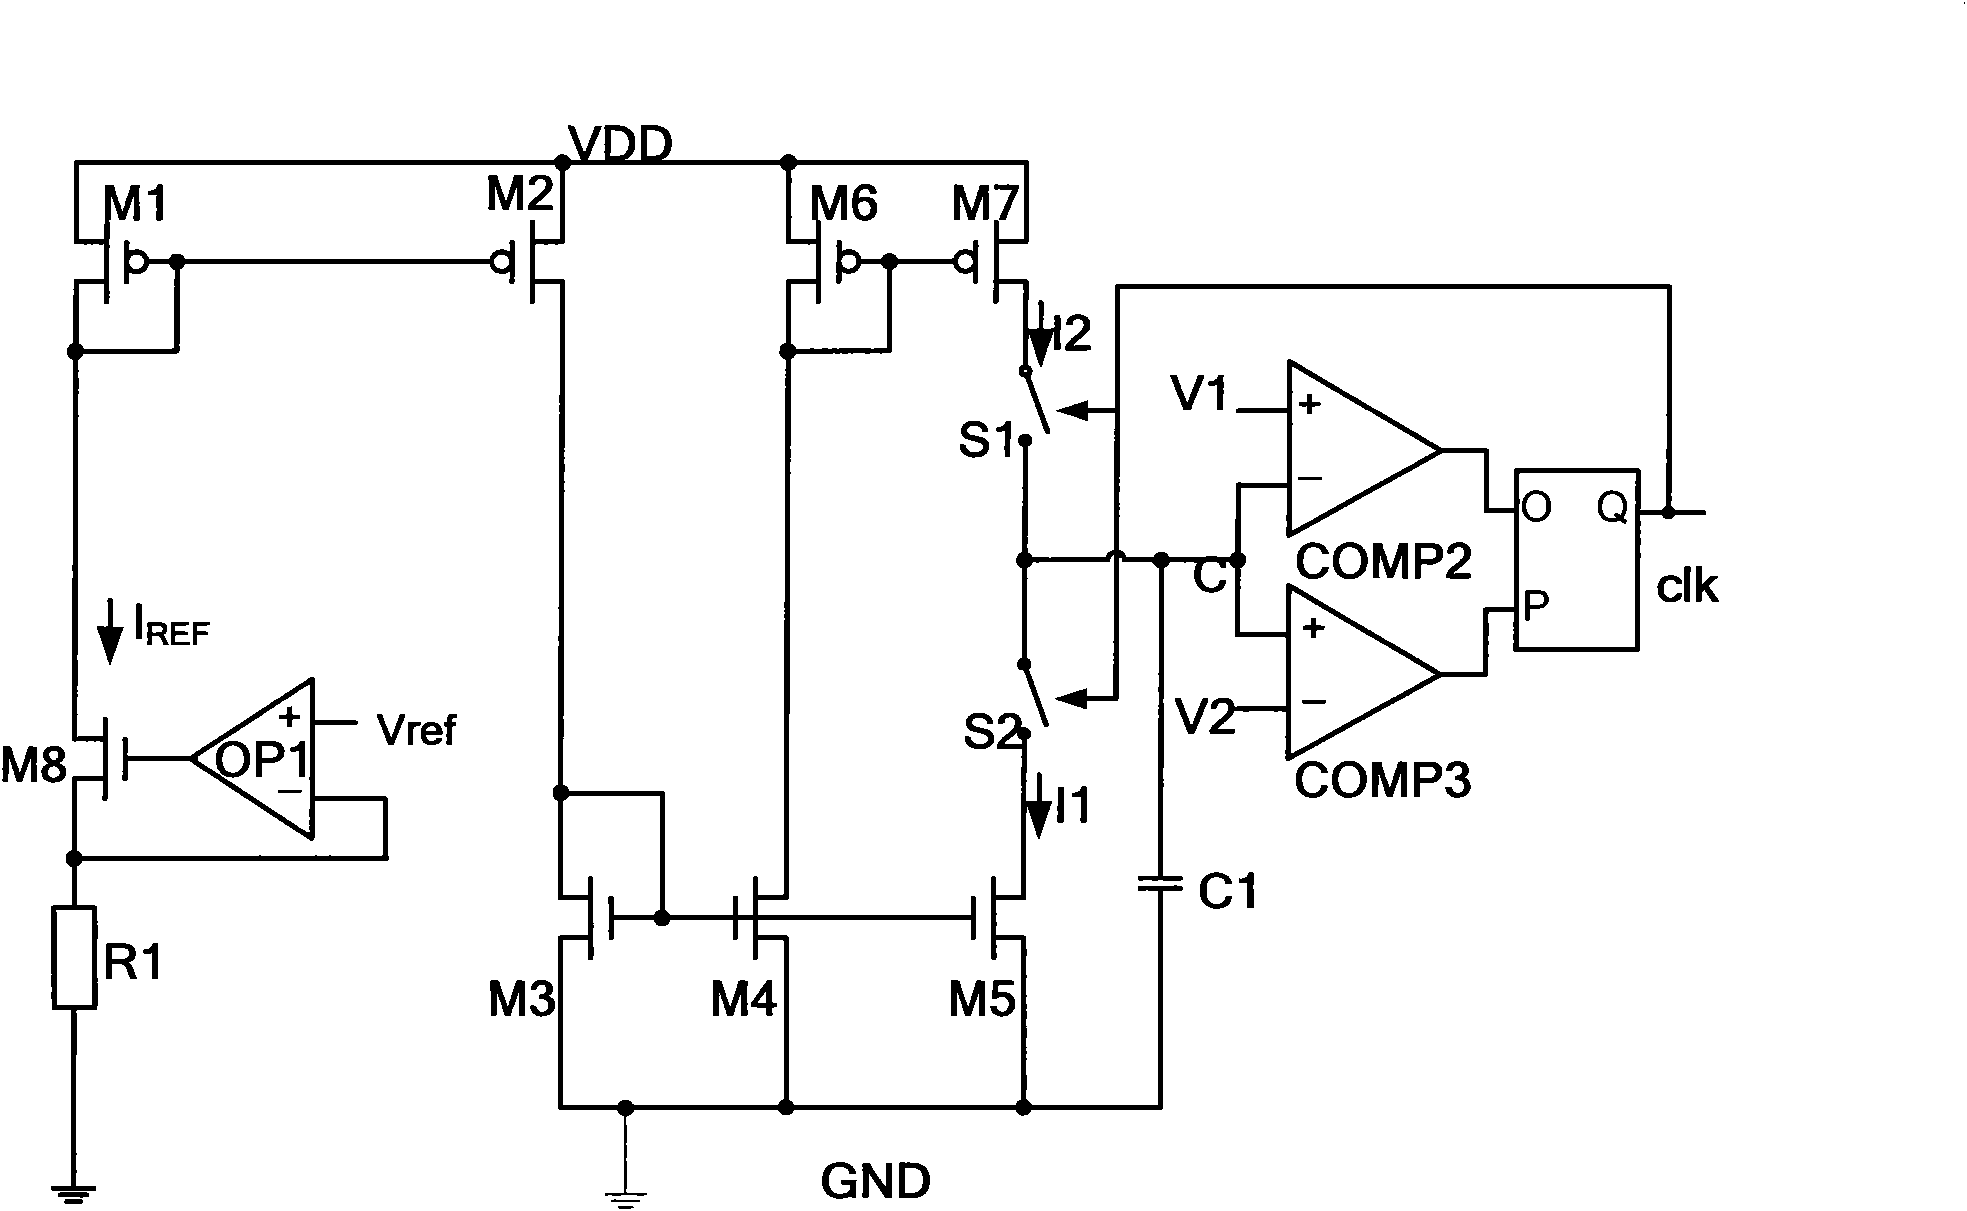 Multi-frequency oscillator applied to electronic ballast